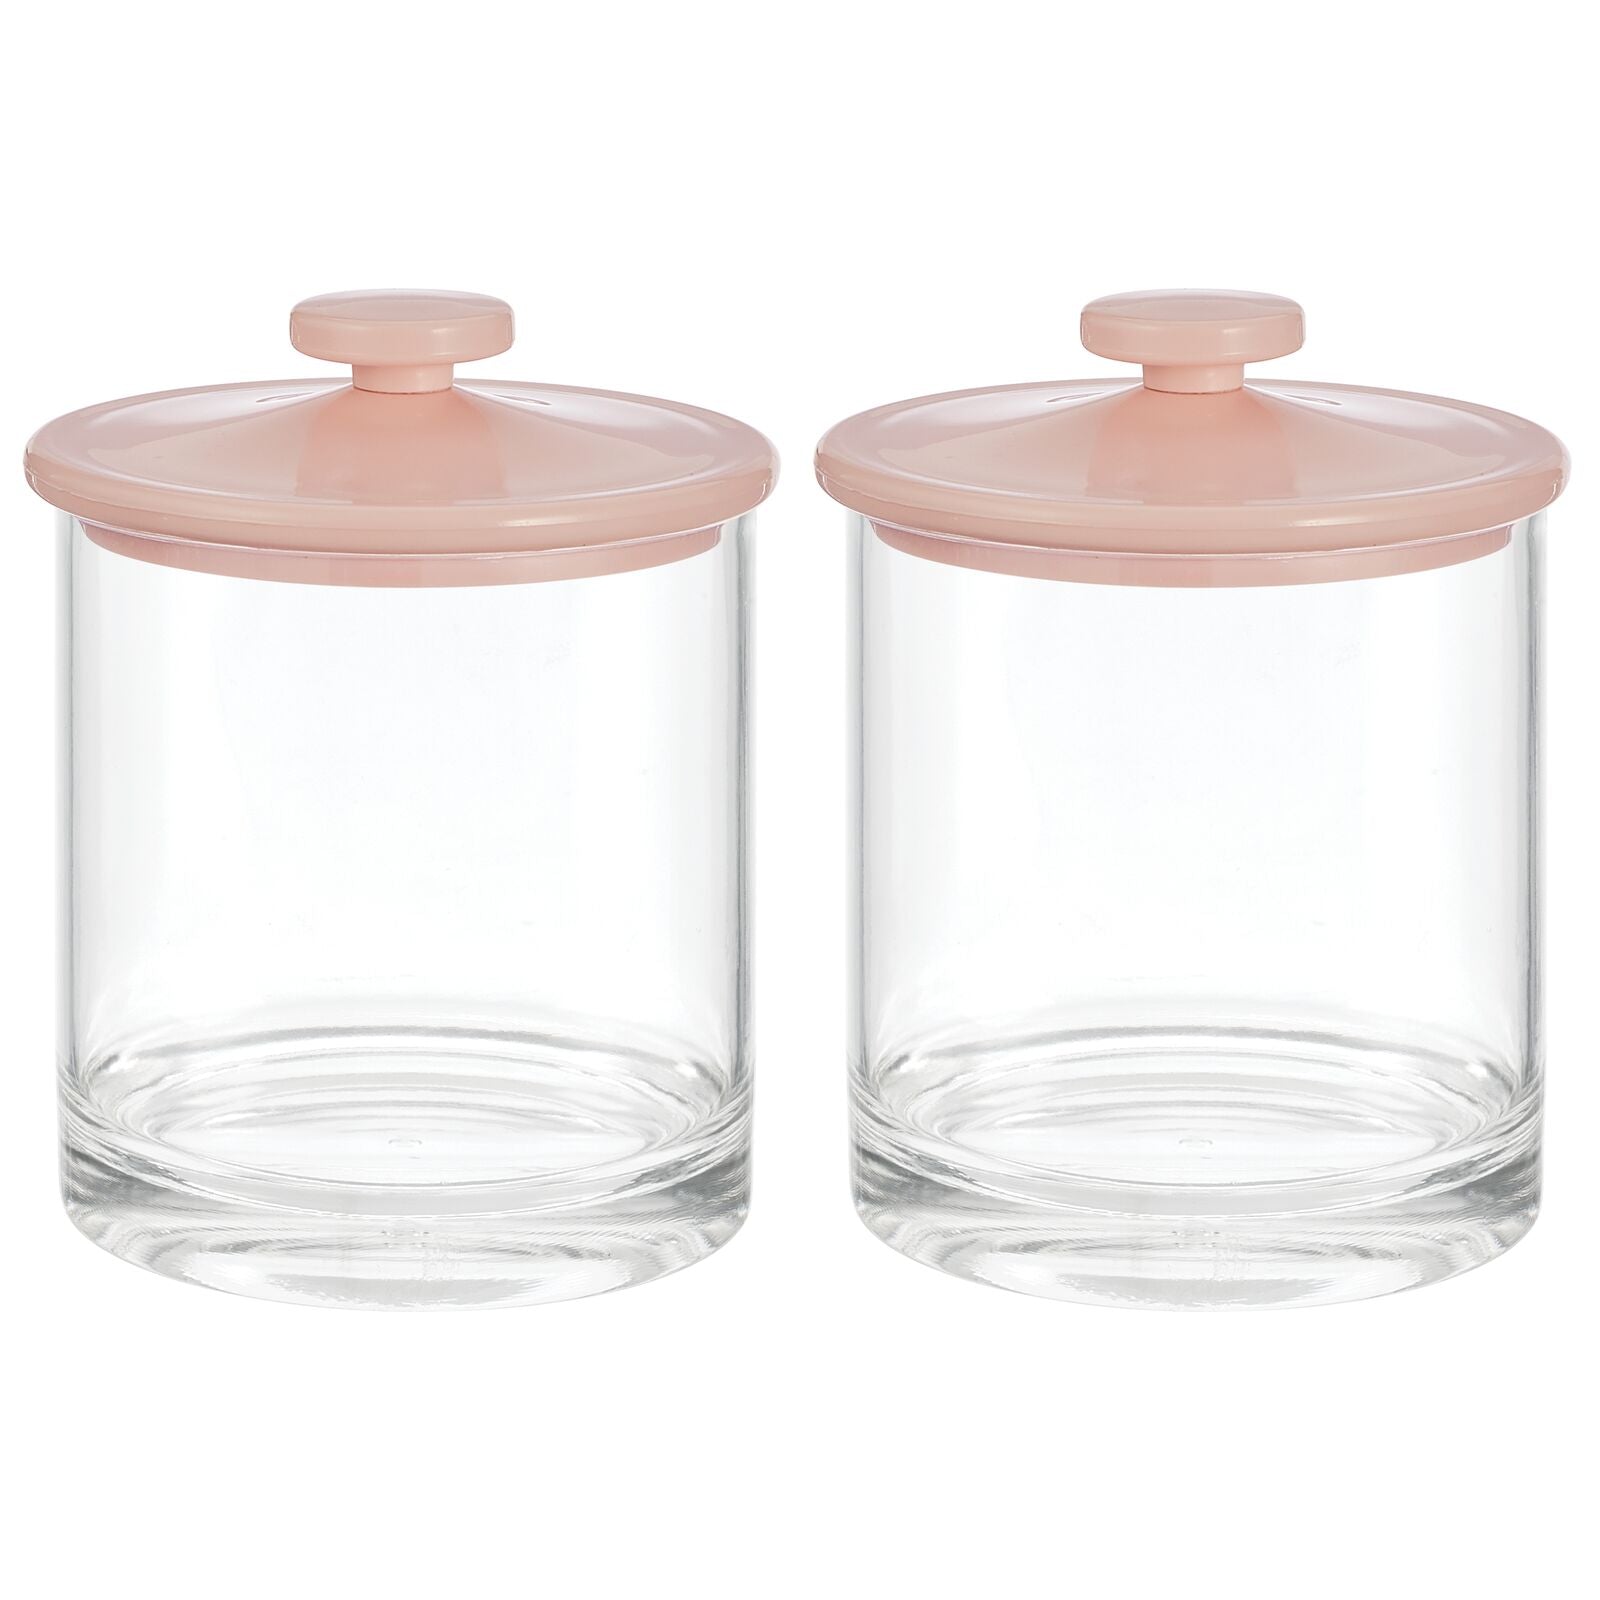 4ct mDesign Small Round Acrylic Apothecary Canister Jars 4 Pack Clear/Light Pink